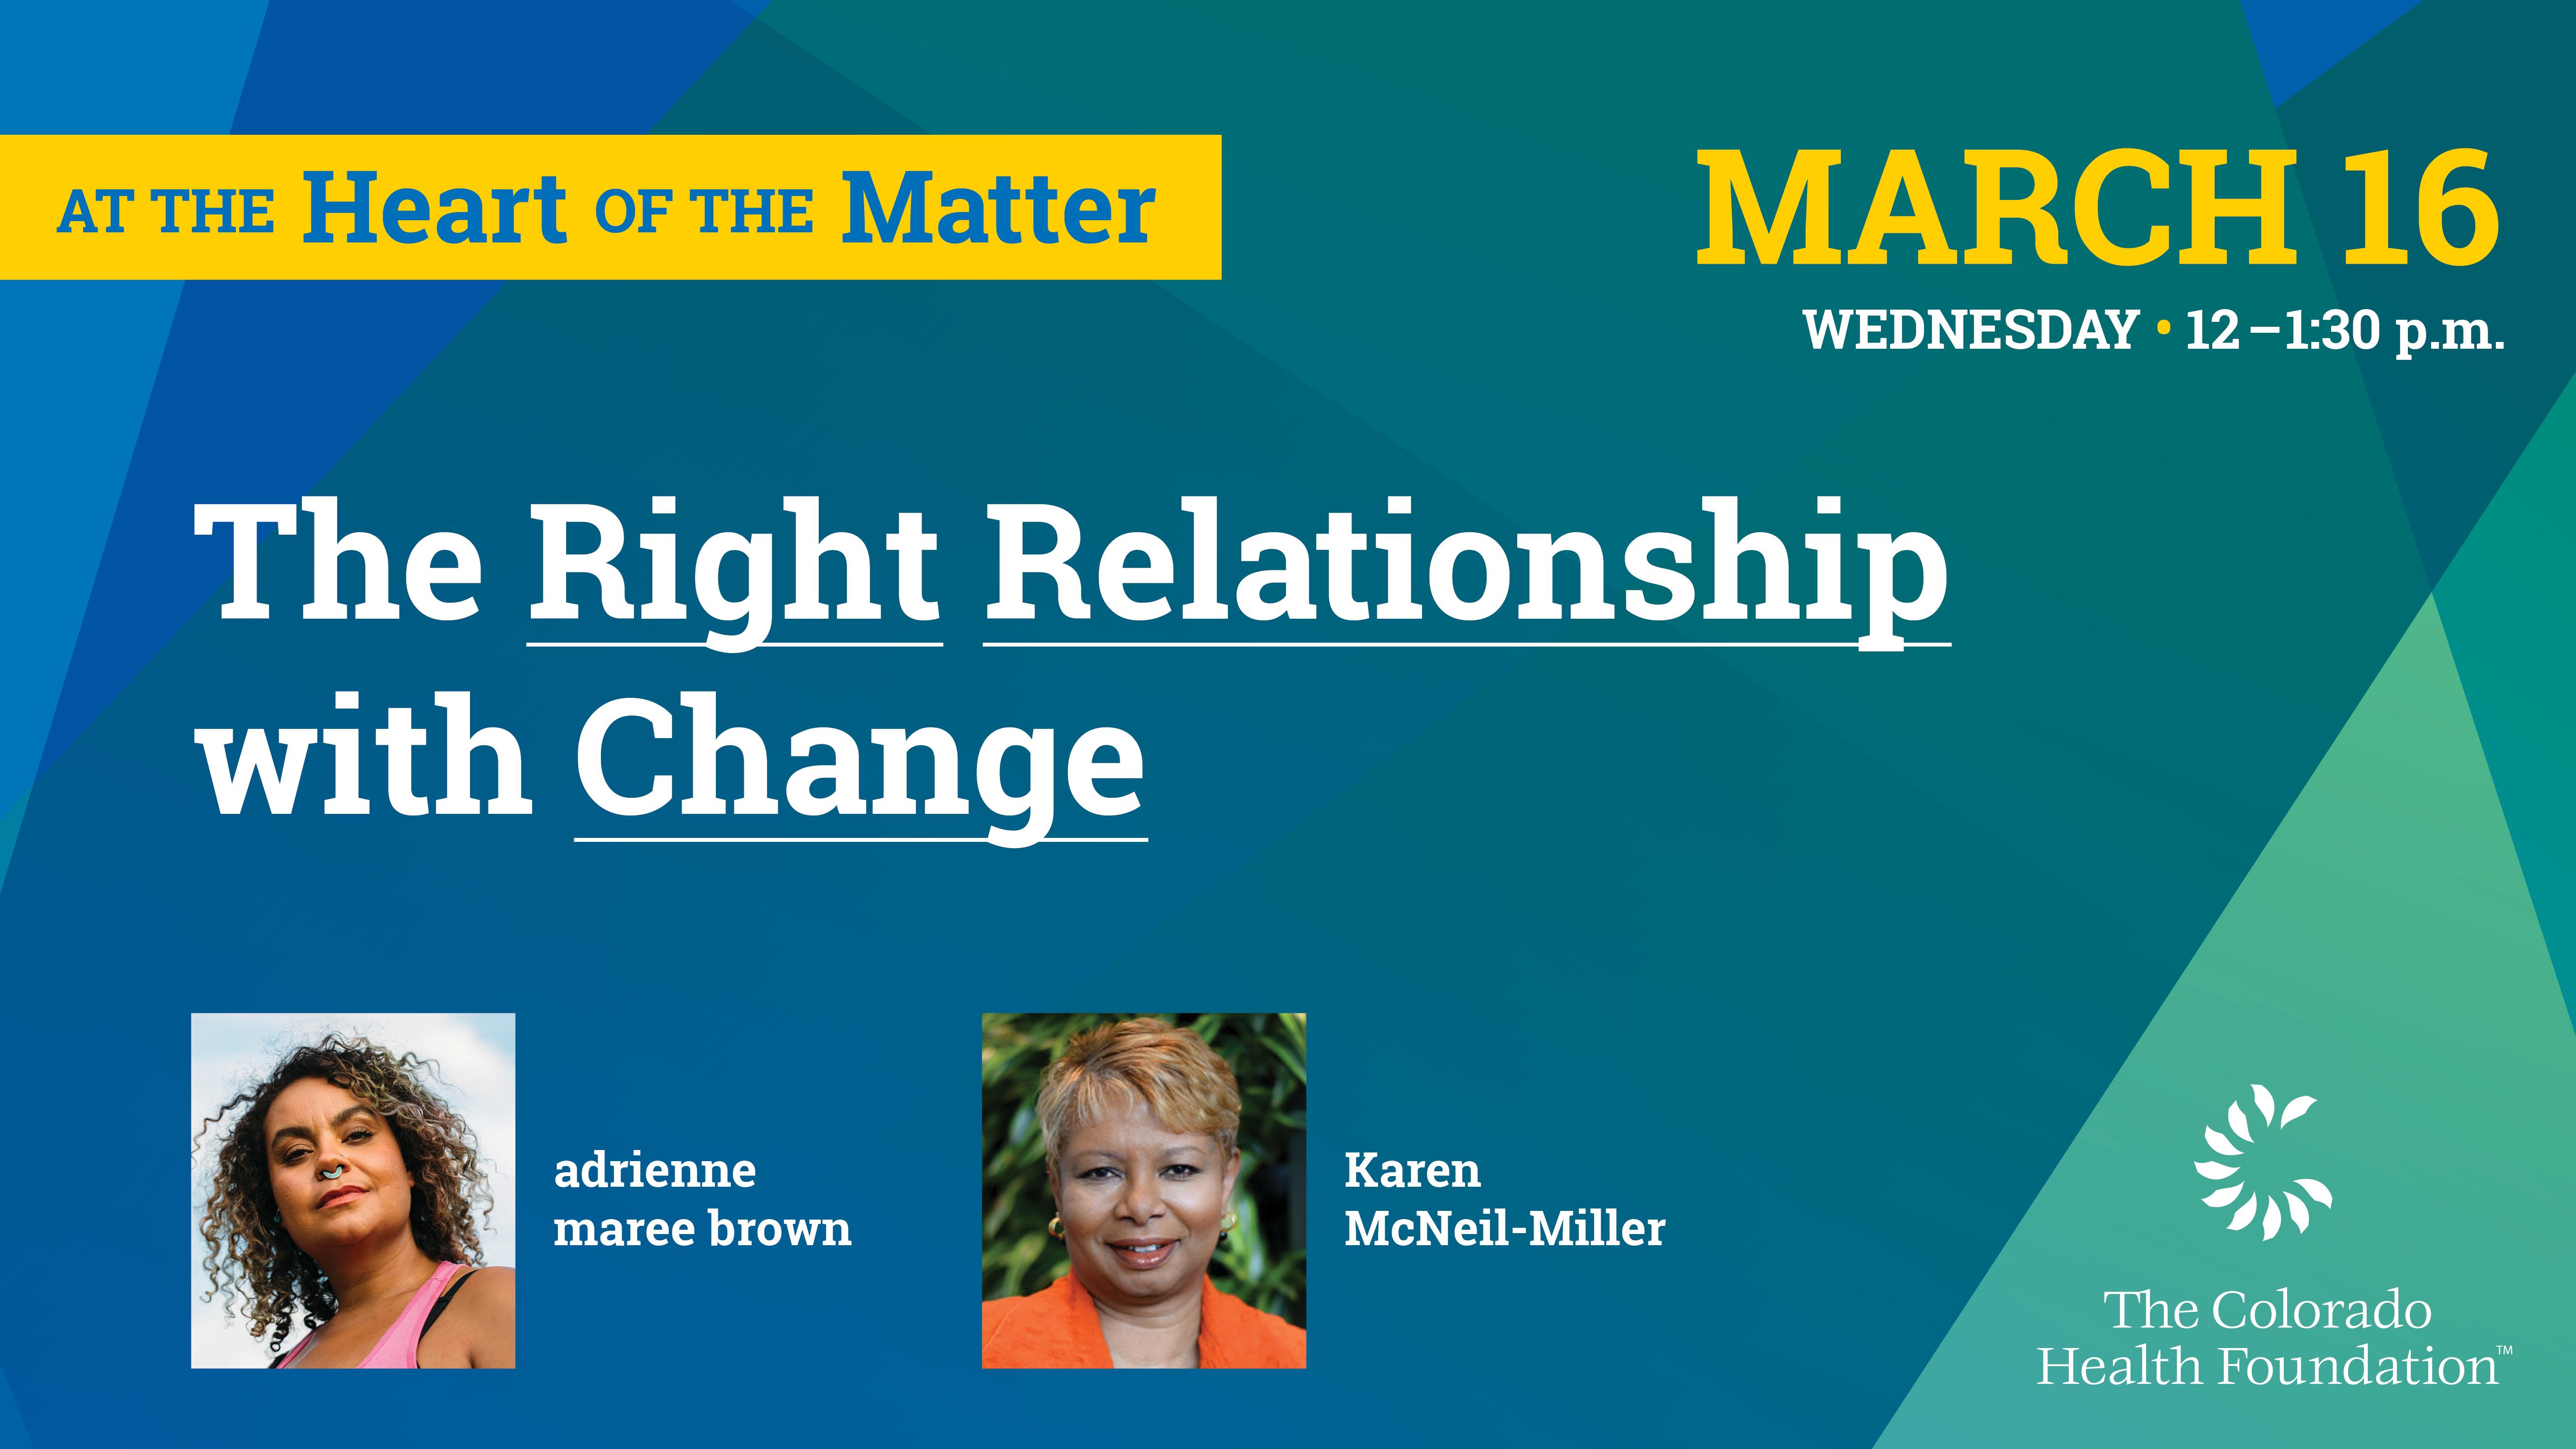 At the Heart of the Matter: The Right Relationship with Change